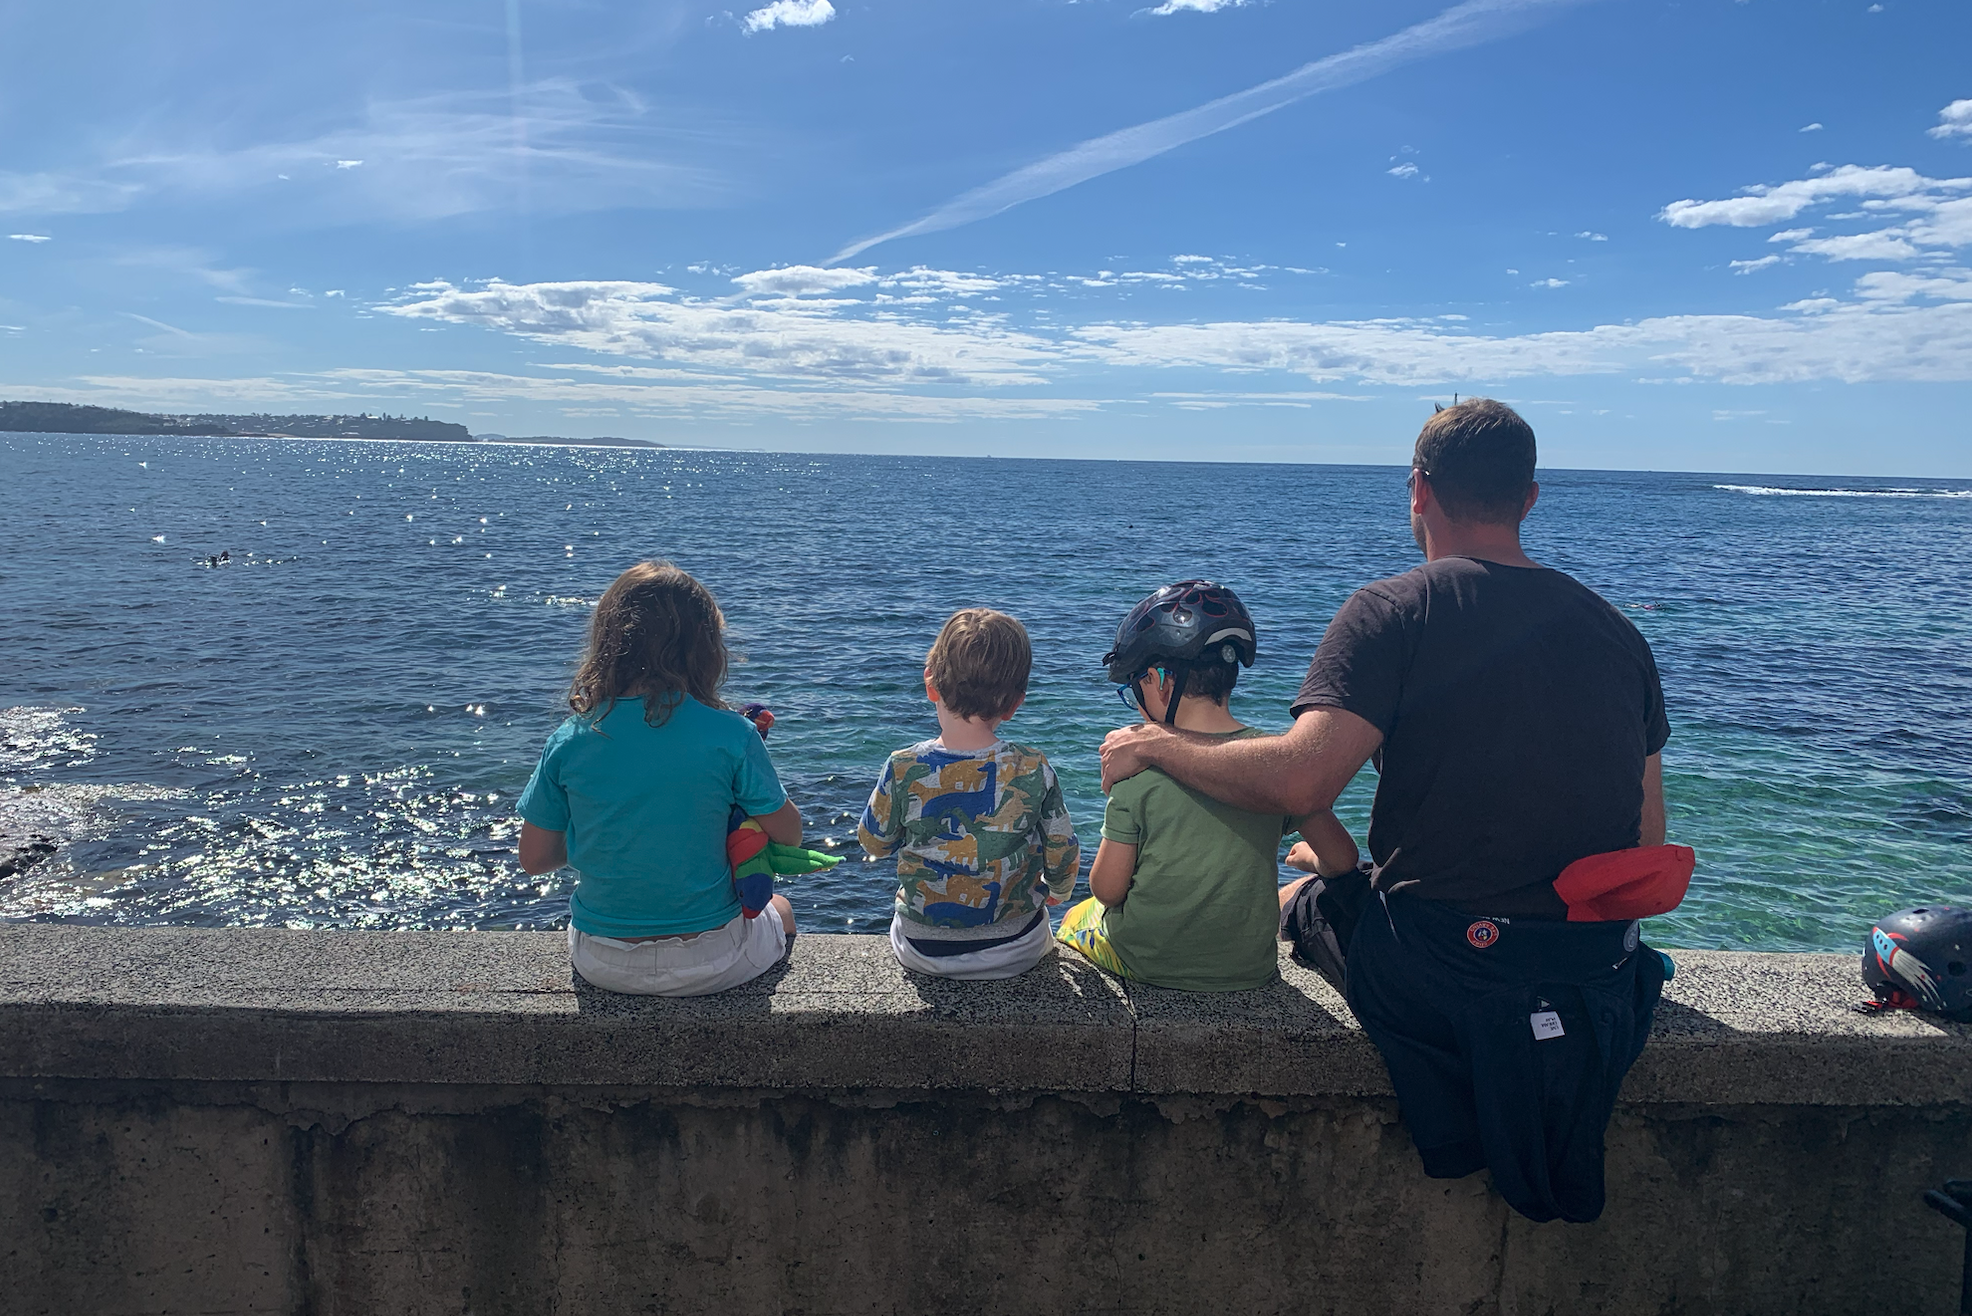 Taking in the ocean as a family.